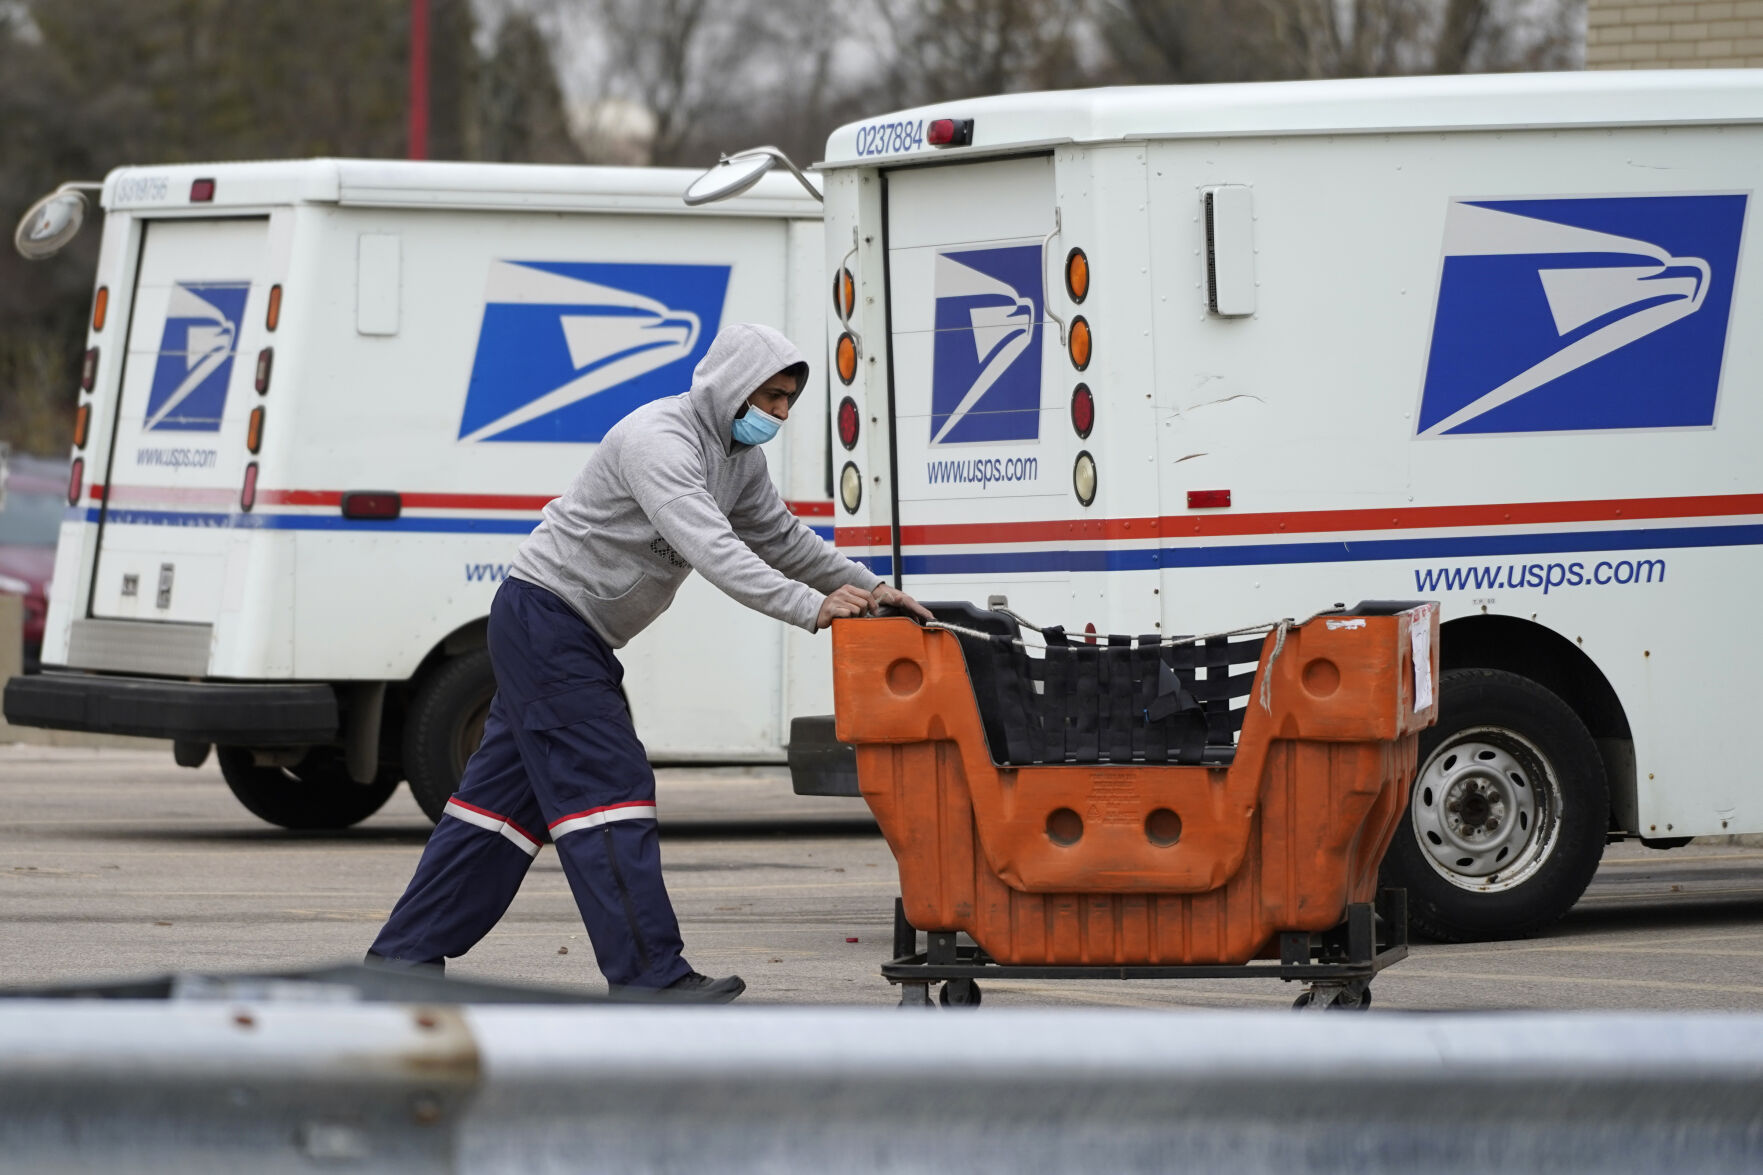 <p>FILE - A United States Postal Service employee works outside a post office in Wheeling, Ill., Dec. 3, 2021. The nation’s major shipping companies are in the best shape to get holiday shoppers’ packages delivered on time since the start of the pandemic, suggesting a return to normalcy. (AP Photo/Nam Y. Huh, File)</p>   PHOTO CREDIT: Nam Y. Huh - staff, AP